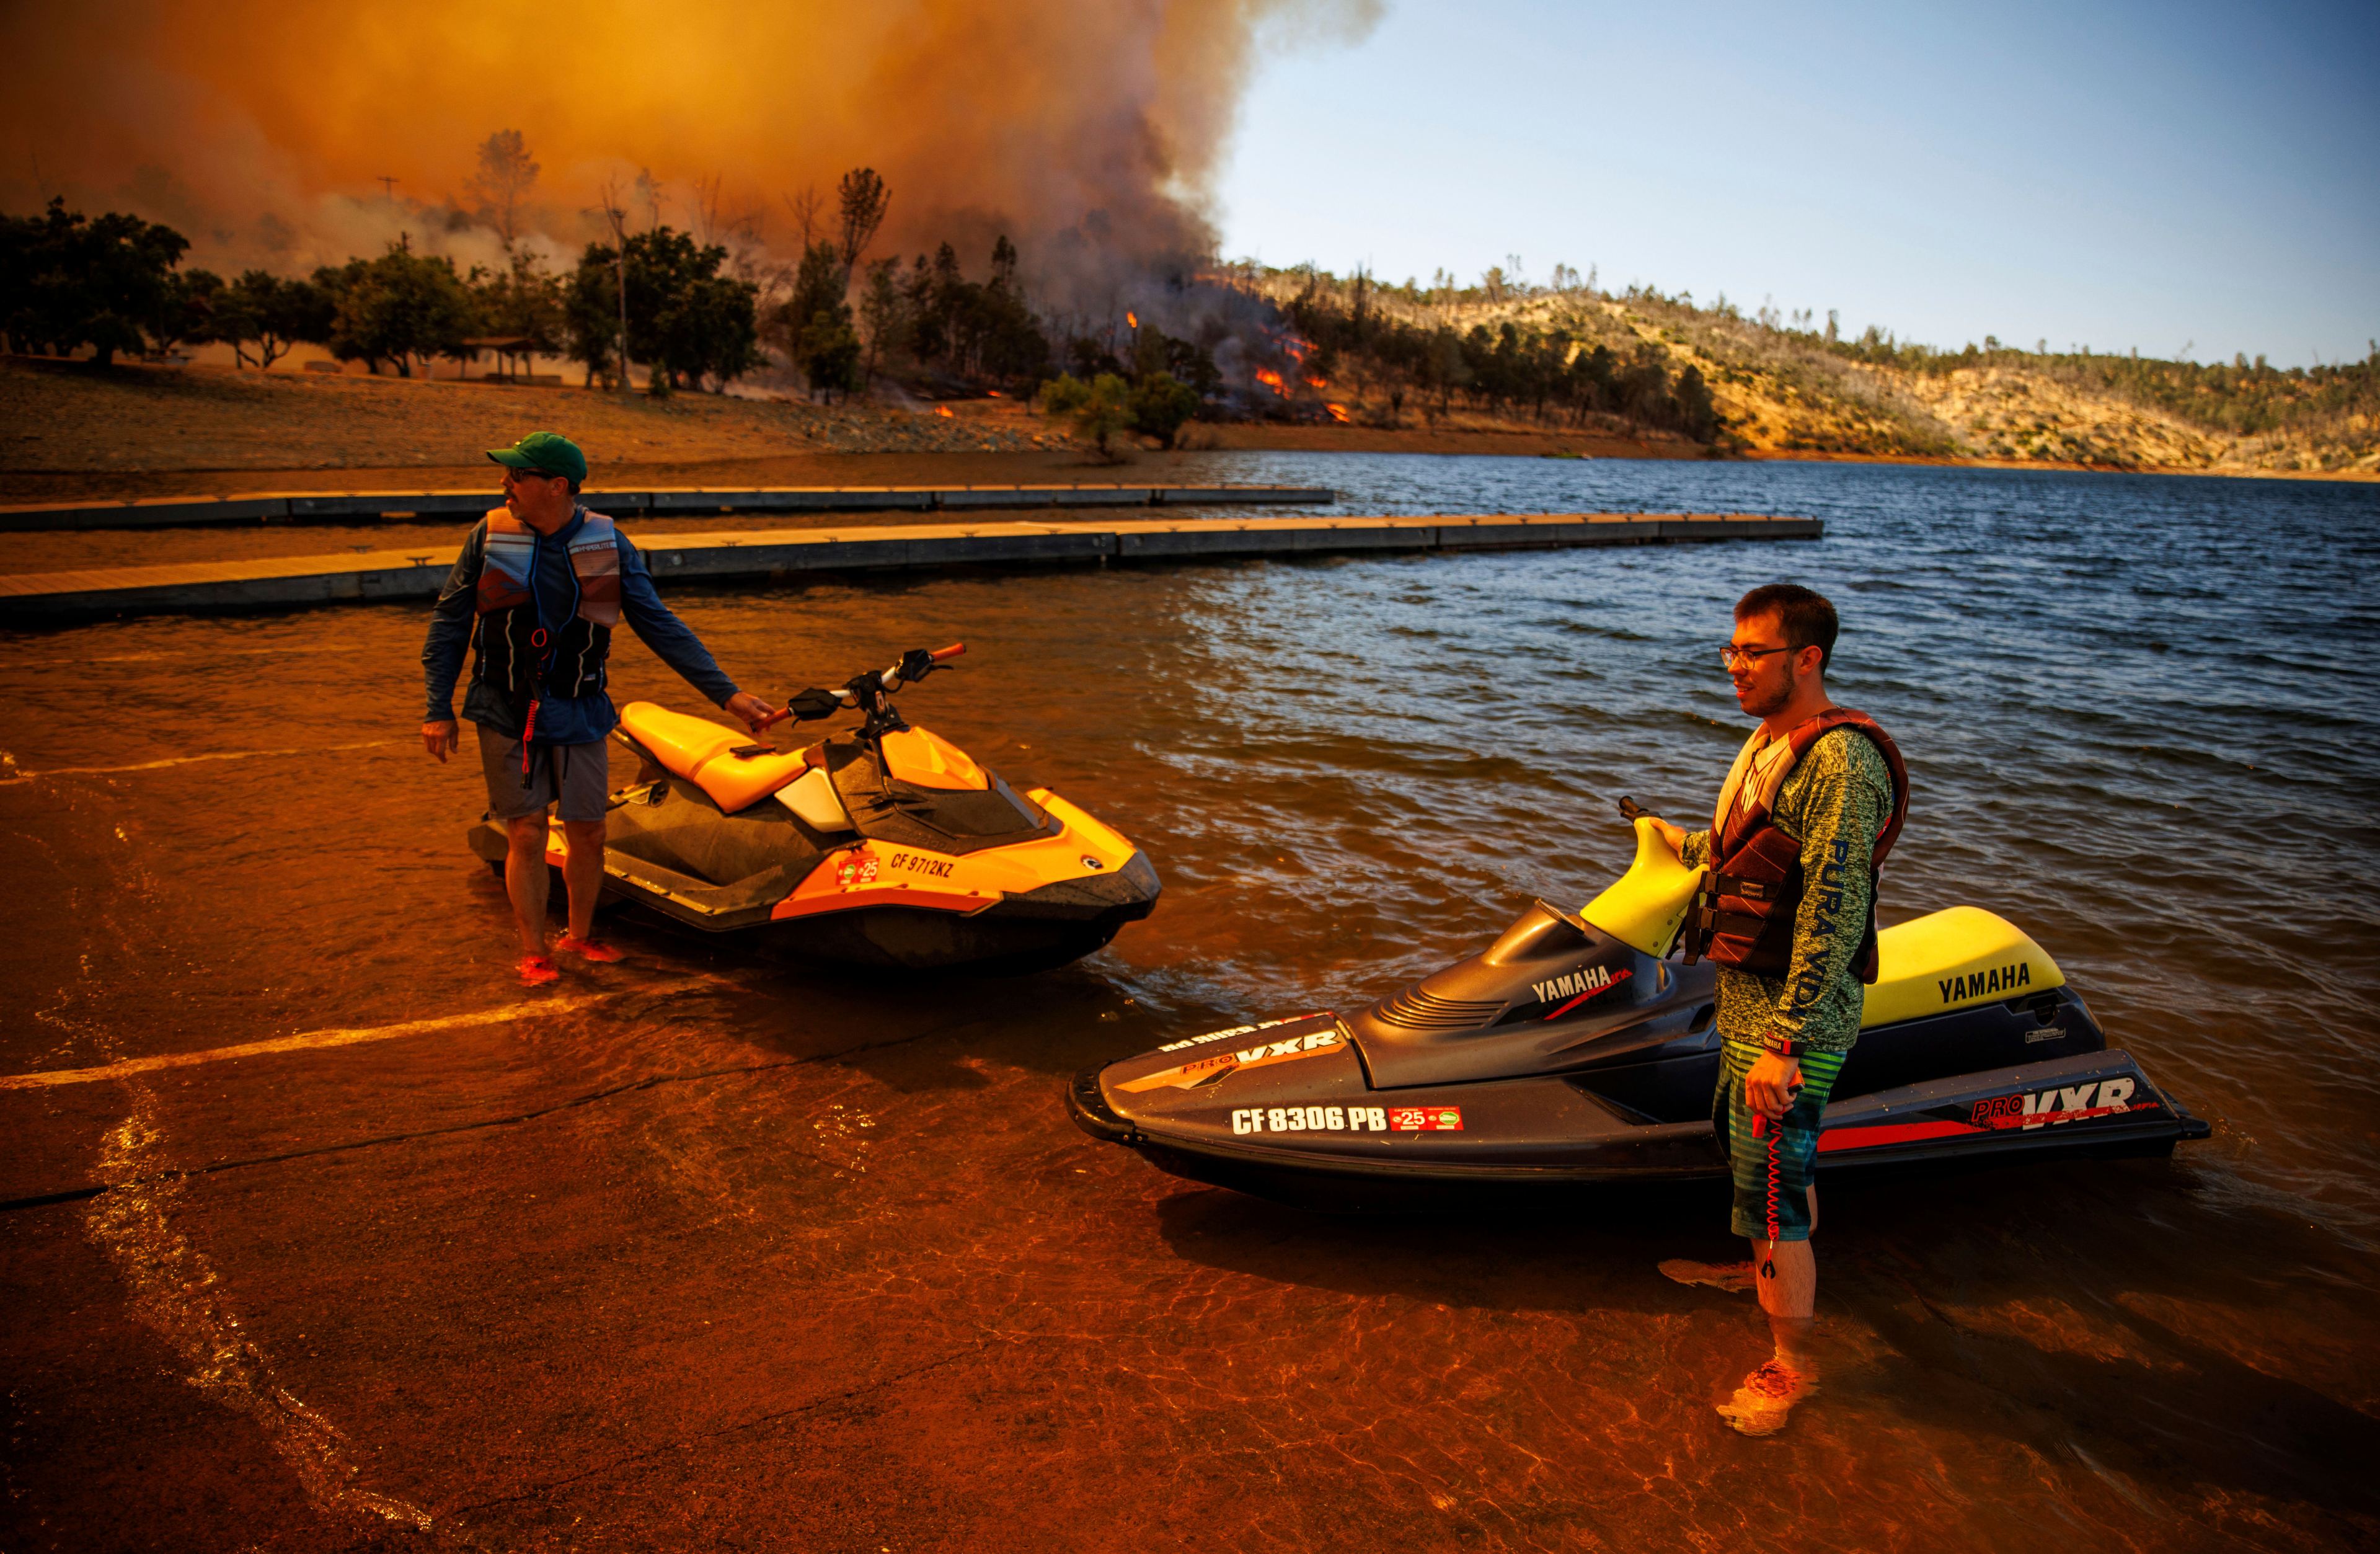 Two men wearing life vests are standing in shallow lake waters next to jet skis. Behind them, a forest fire burns intensely, filling the sky with thick smoke.